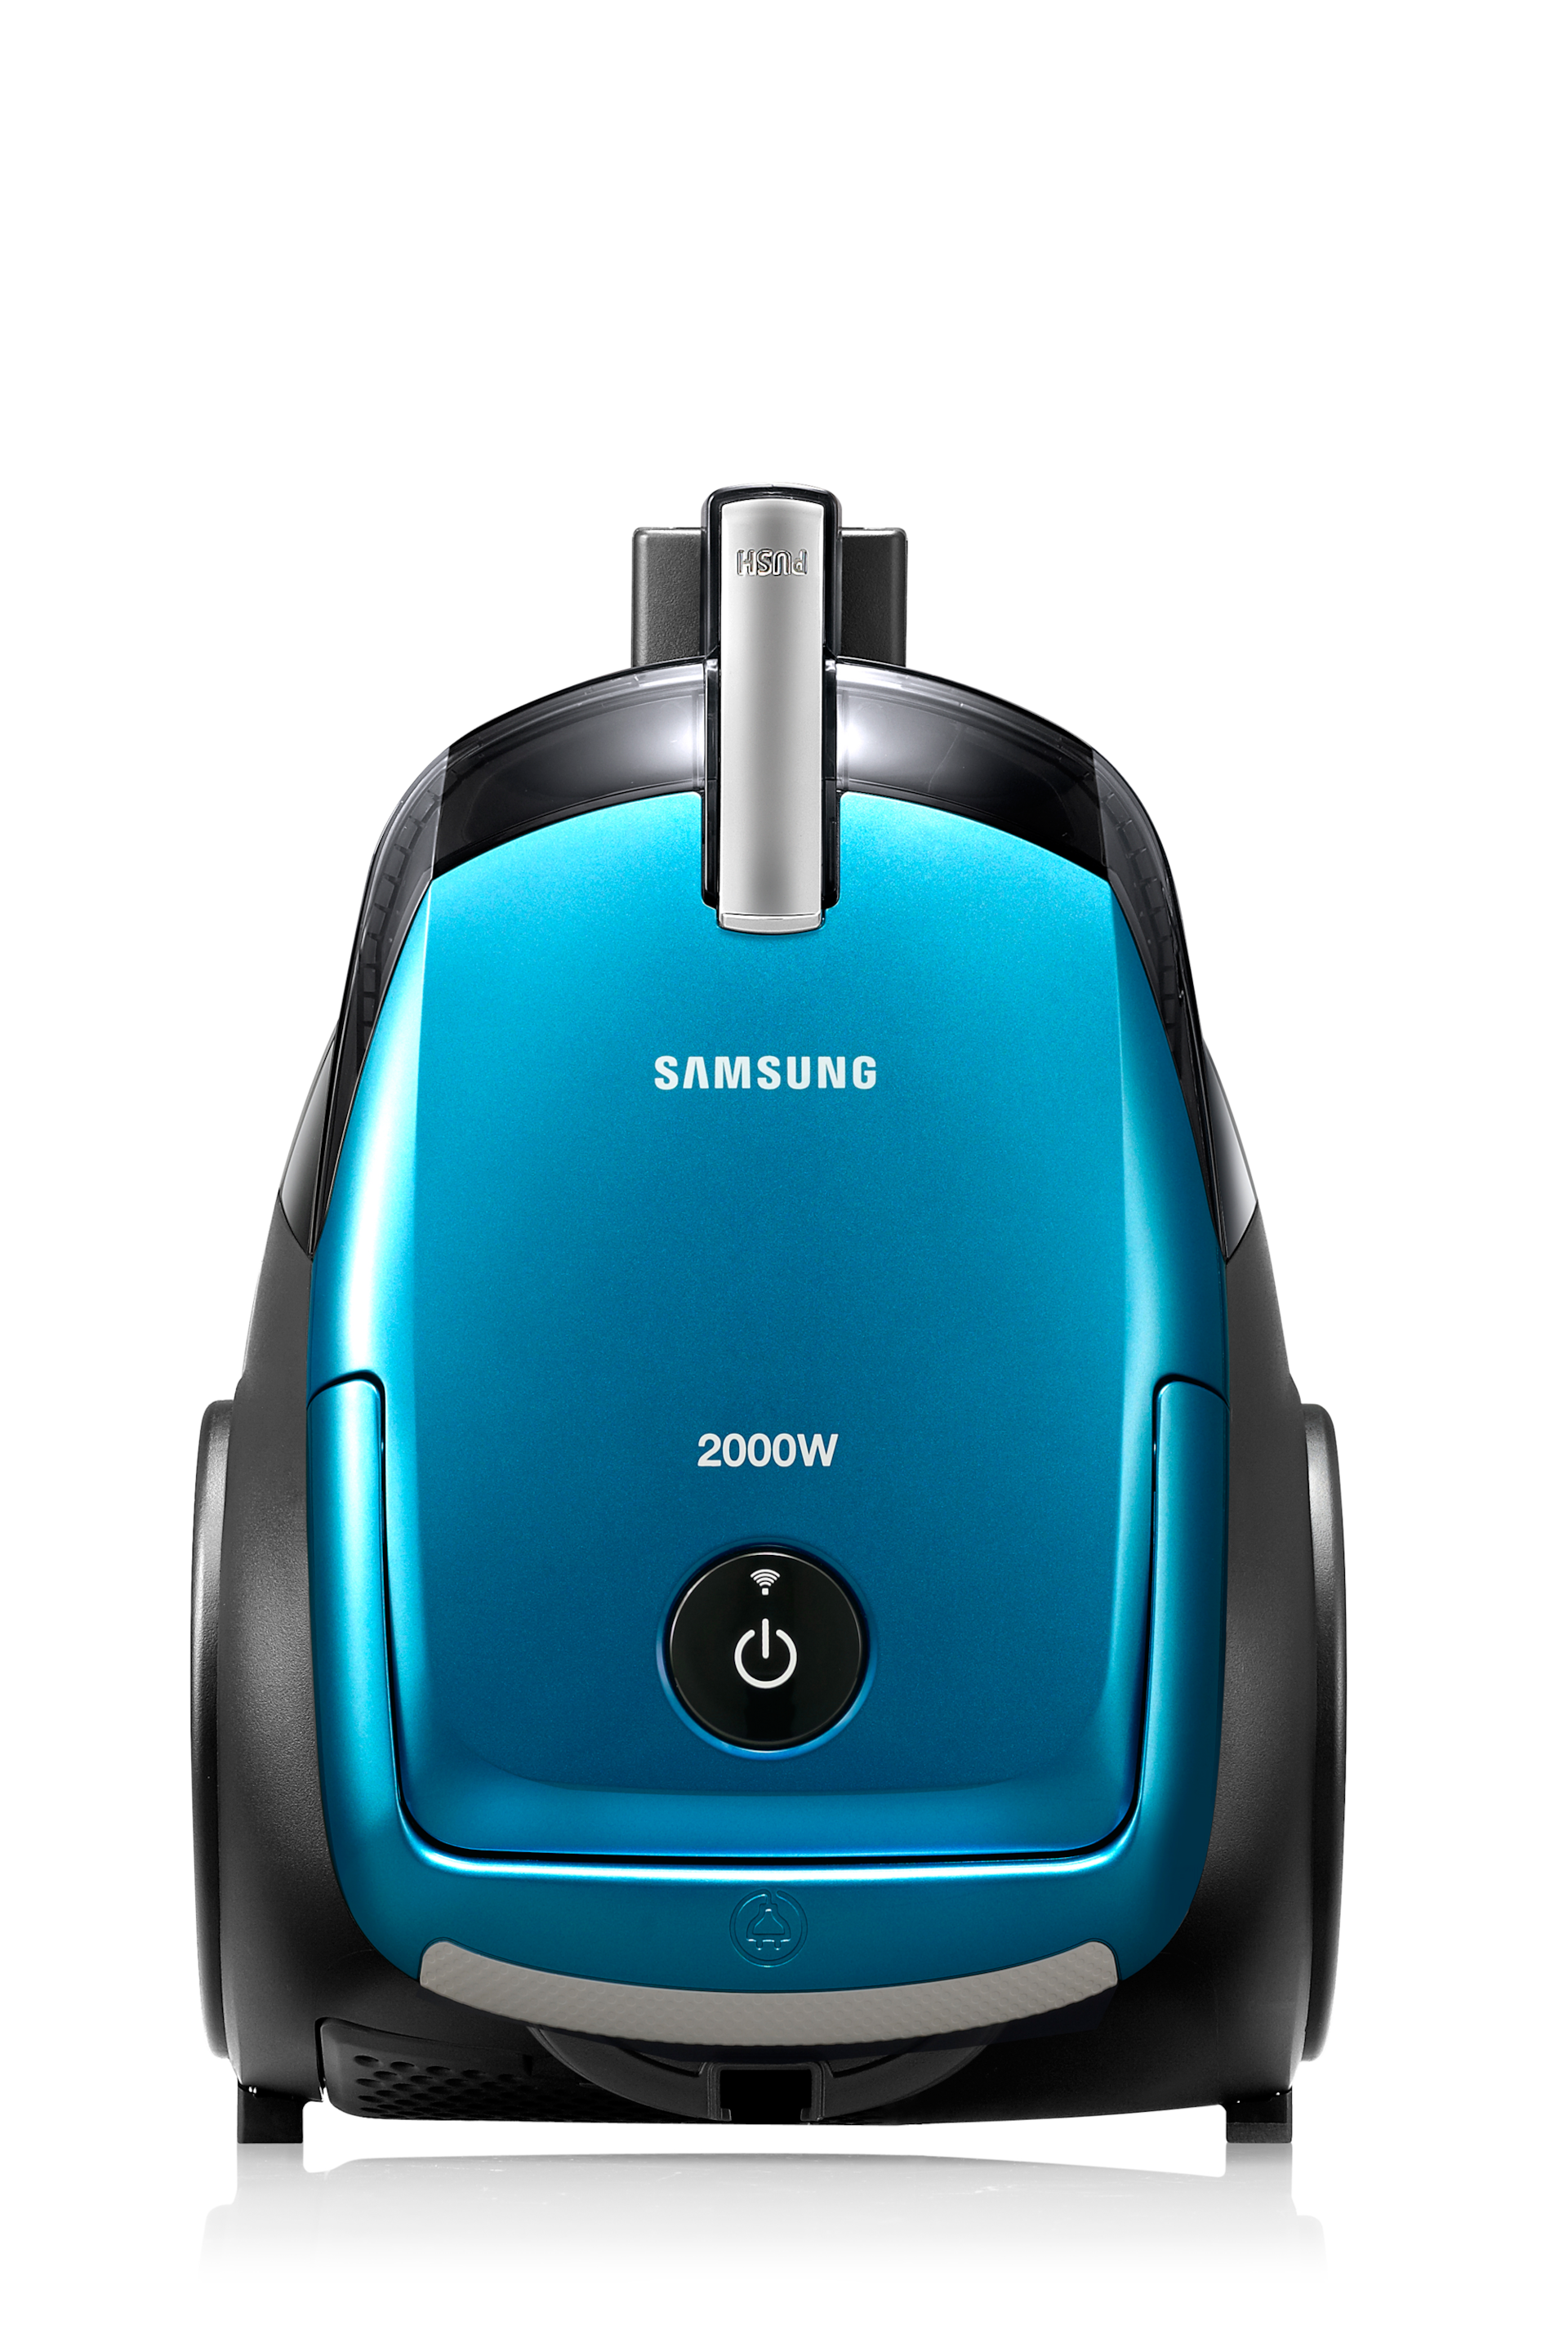 Samsung Vacuum Cleaner VCDC20AV Price, Home Vacuum Cleaner, Features, Reviews2000 x 3000